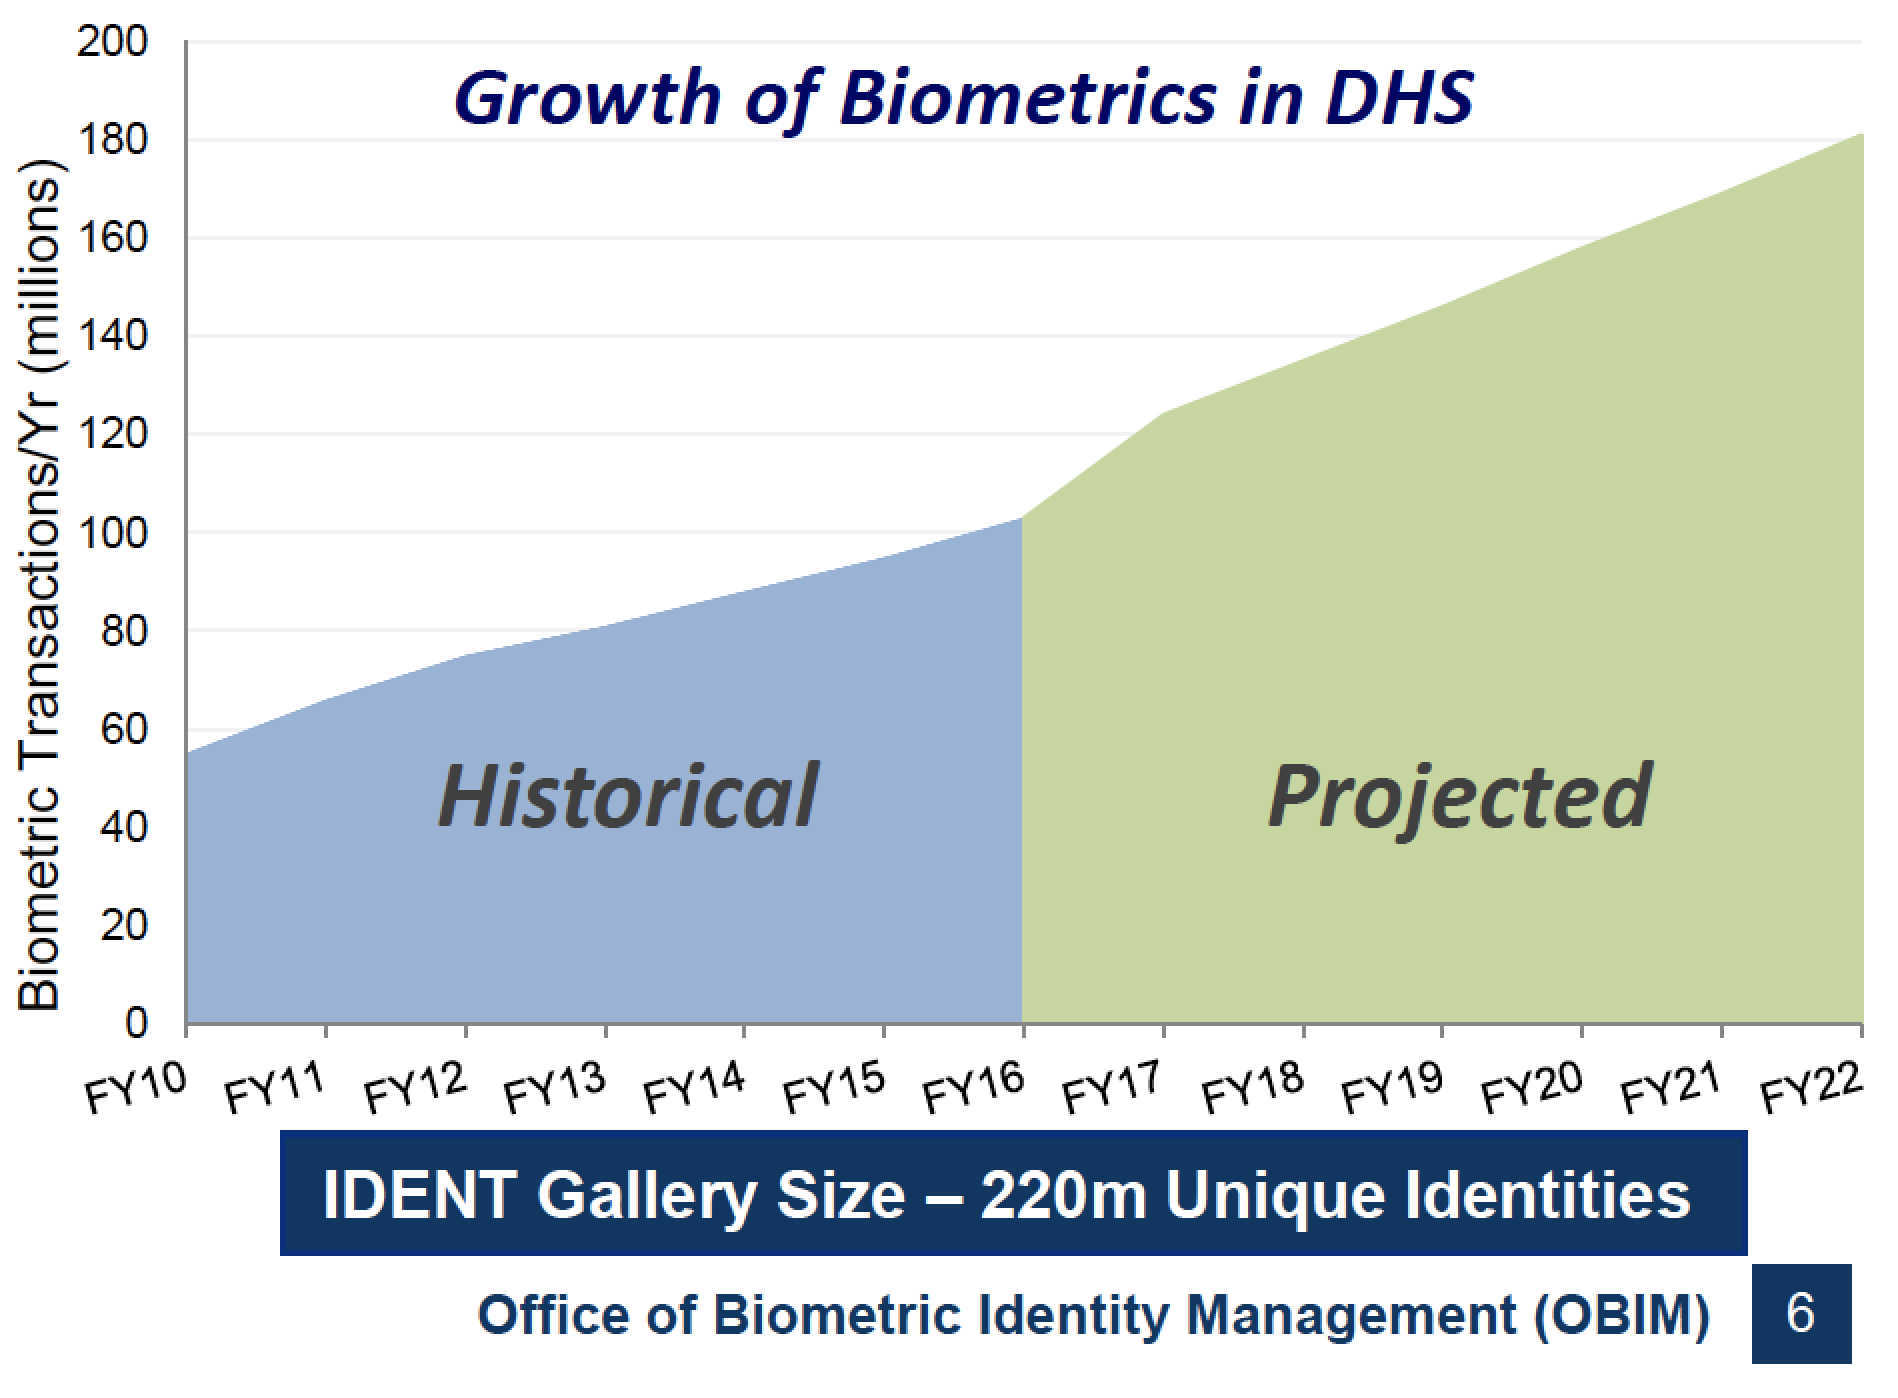 DHS slide showing growth of its legacy IDENT biometric database